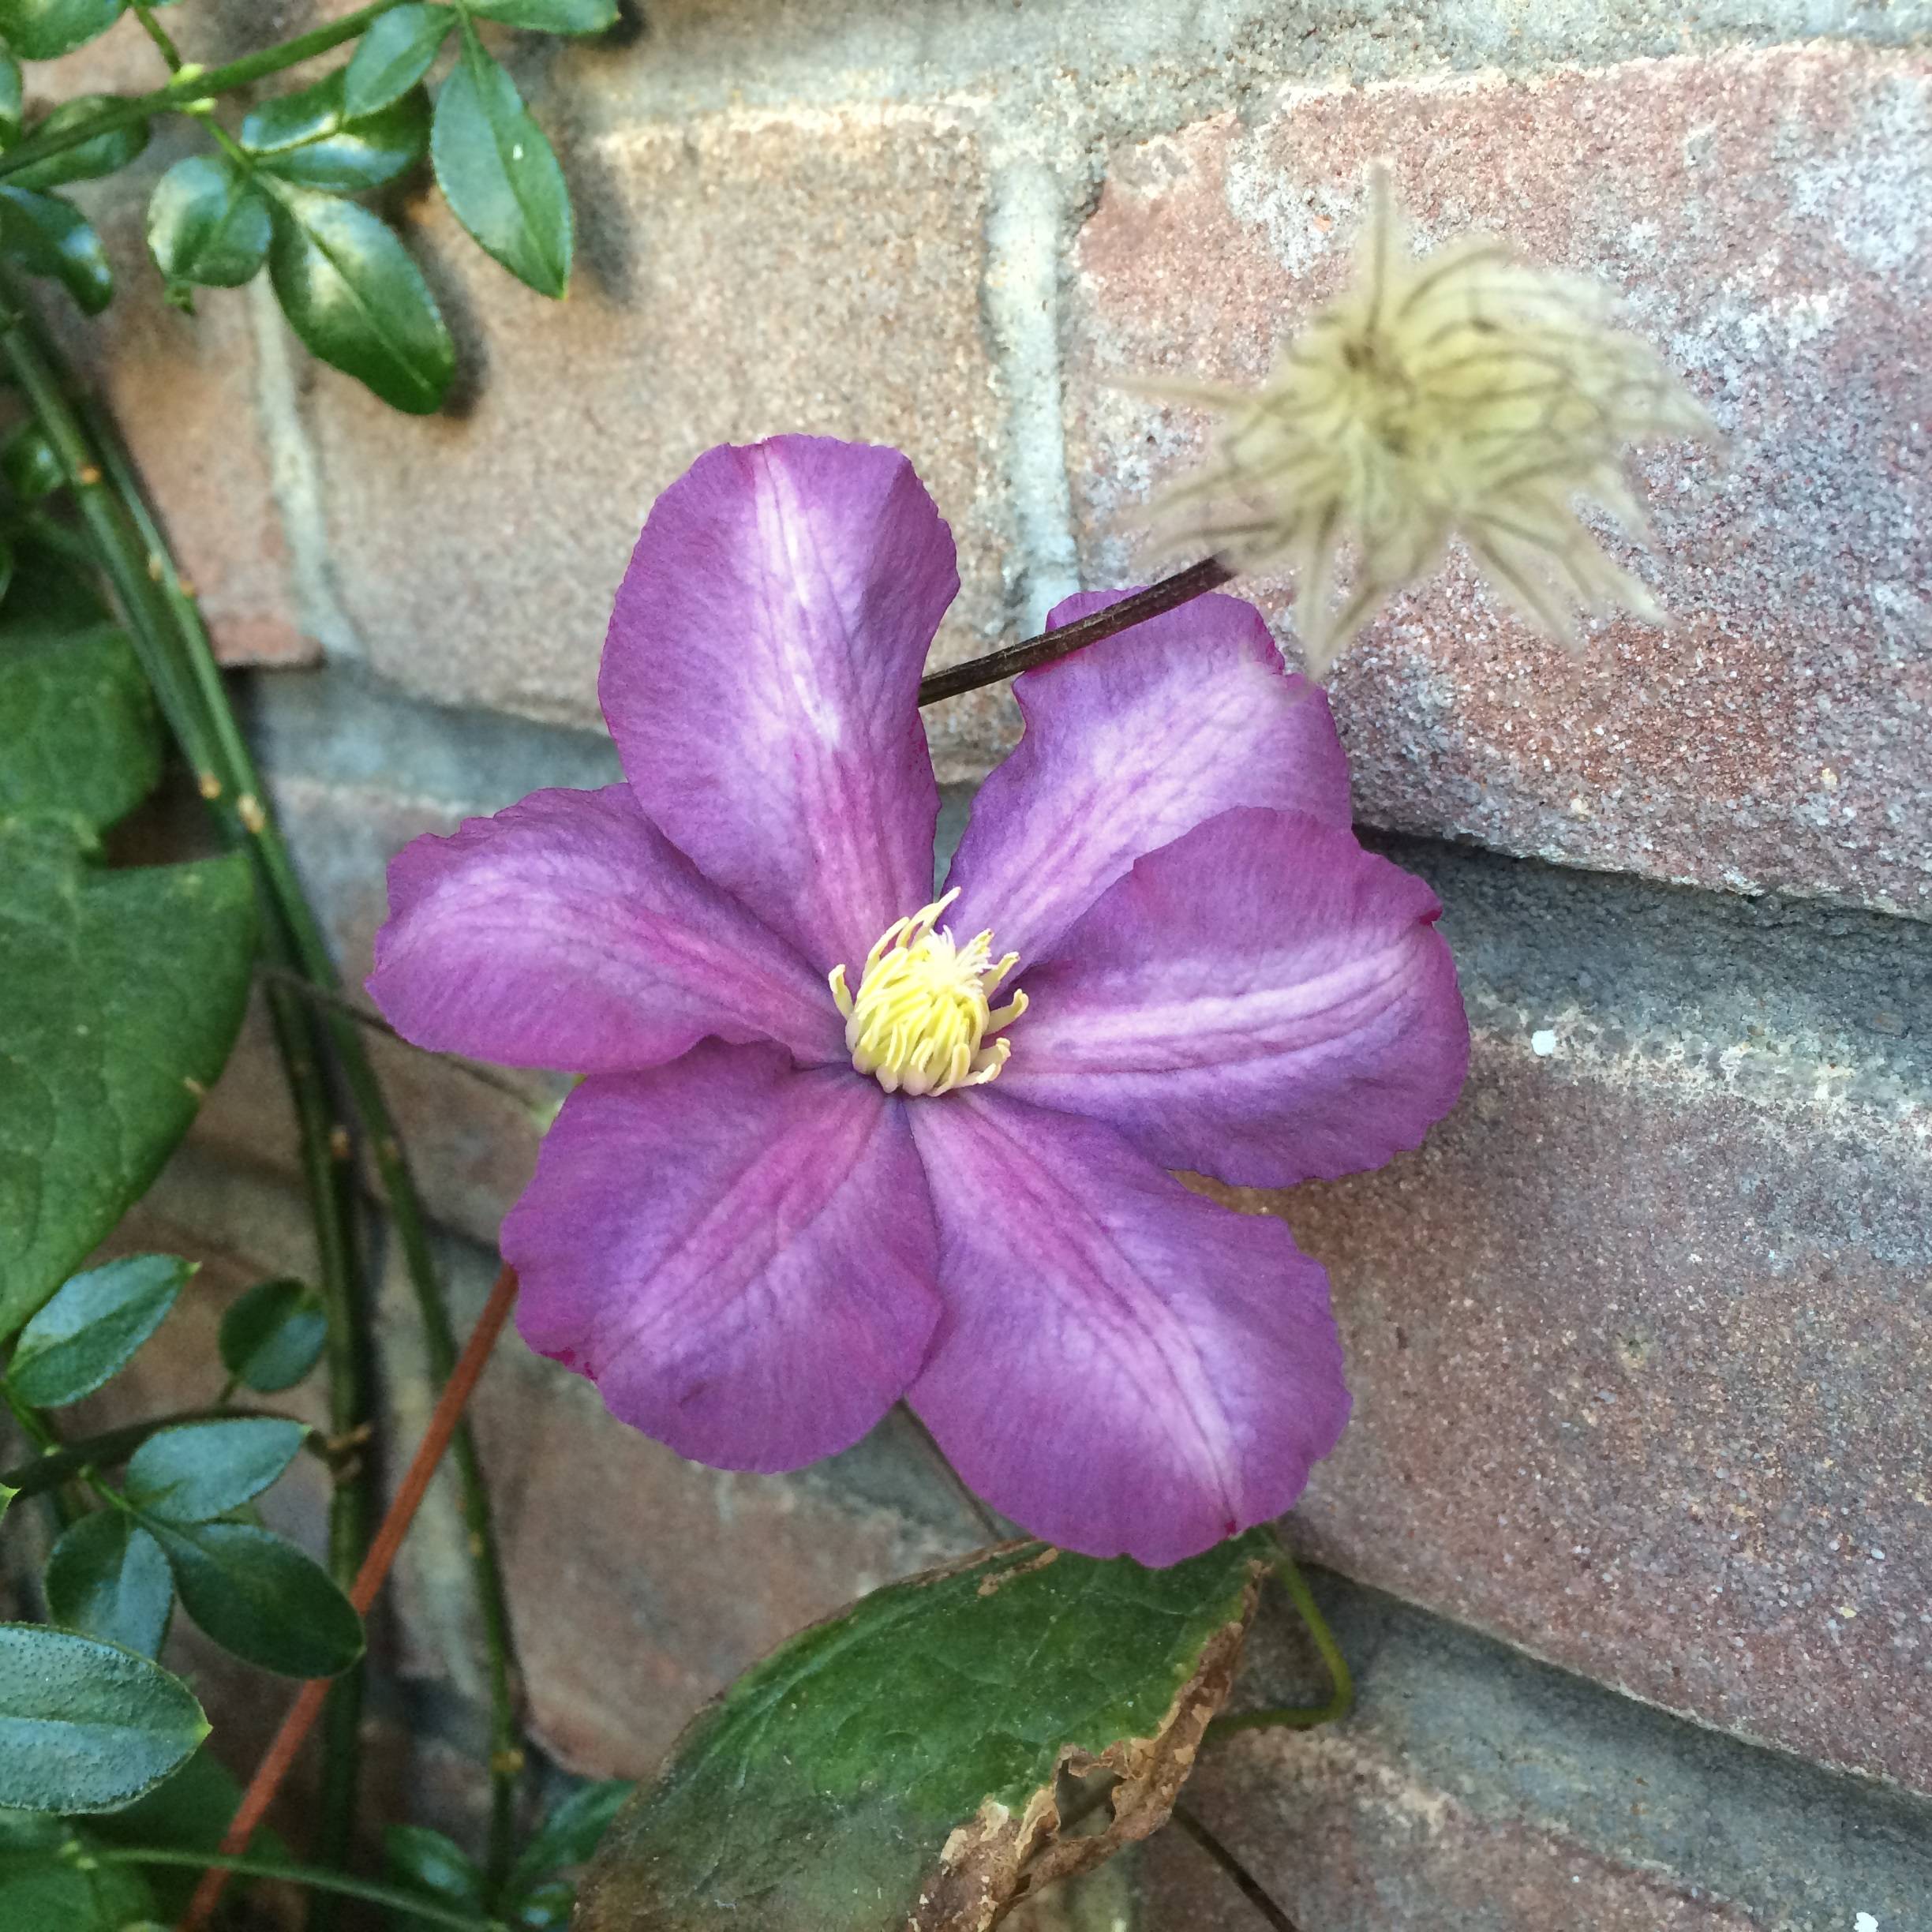 identification - What variety of clematis is this? - Gardening ...